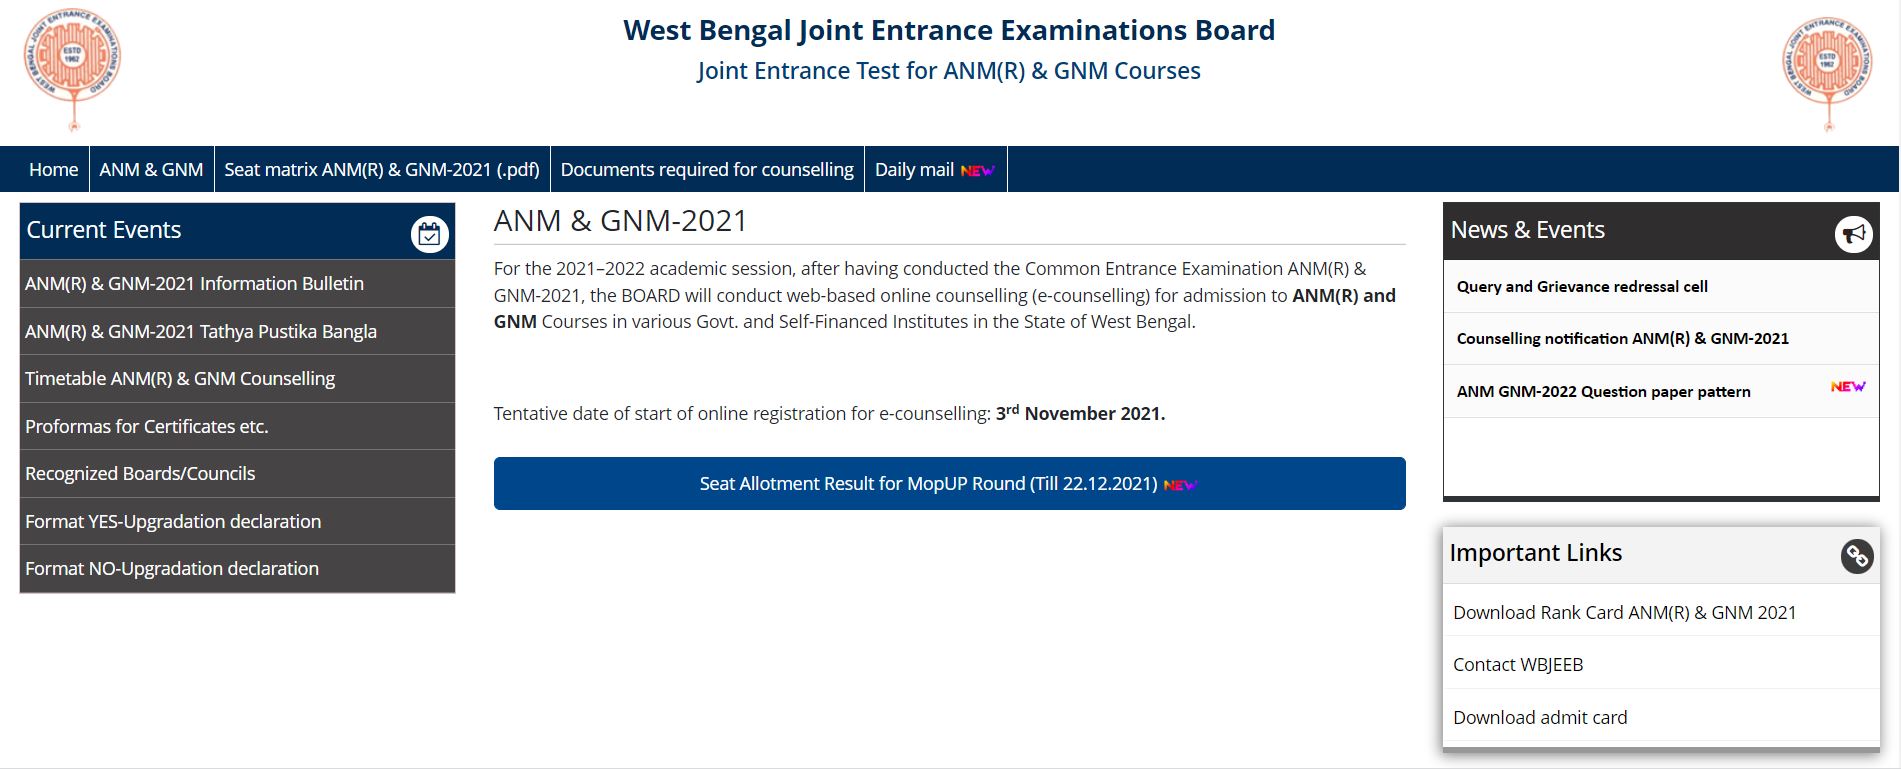 WBJEE Mop UP Seat Allotment Result 2021